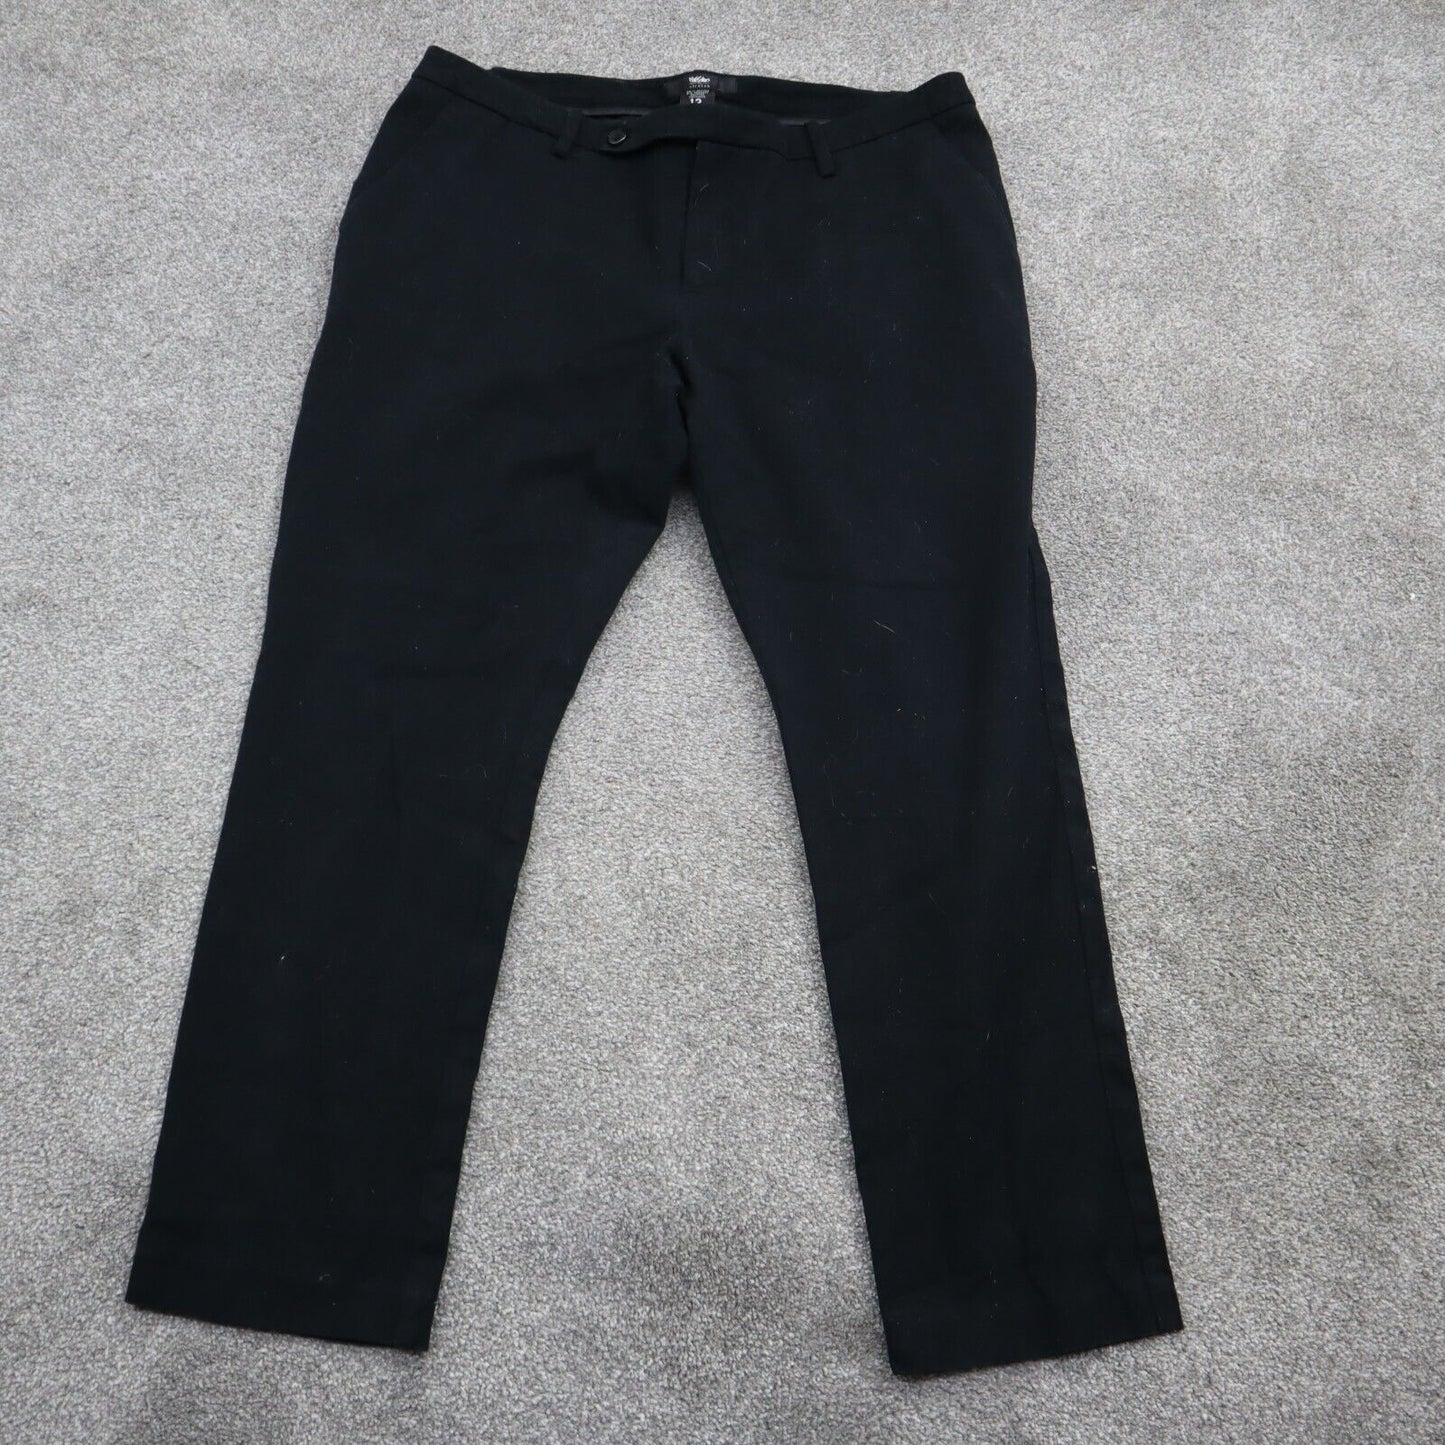 Mossimo Womens Slim Straight Dress Pant Stretch Mid Rise Fit 3 Black Size 12